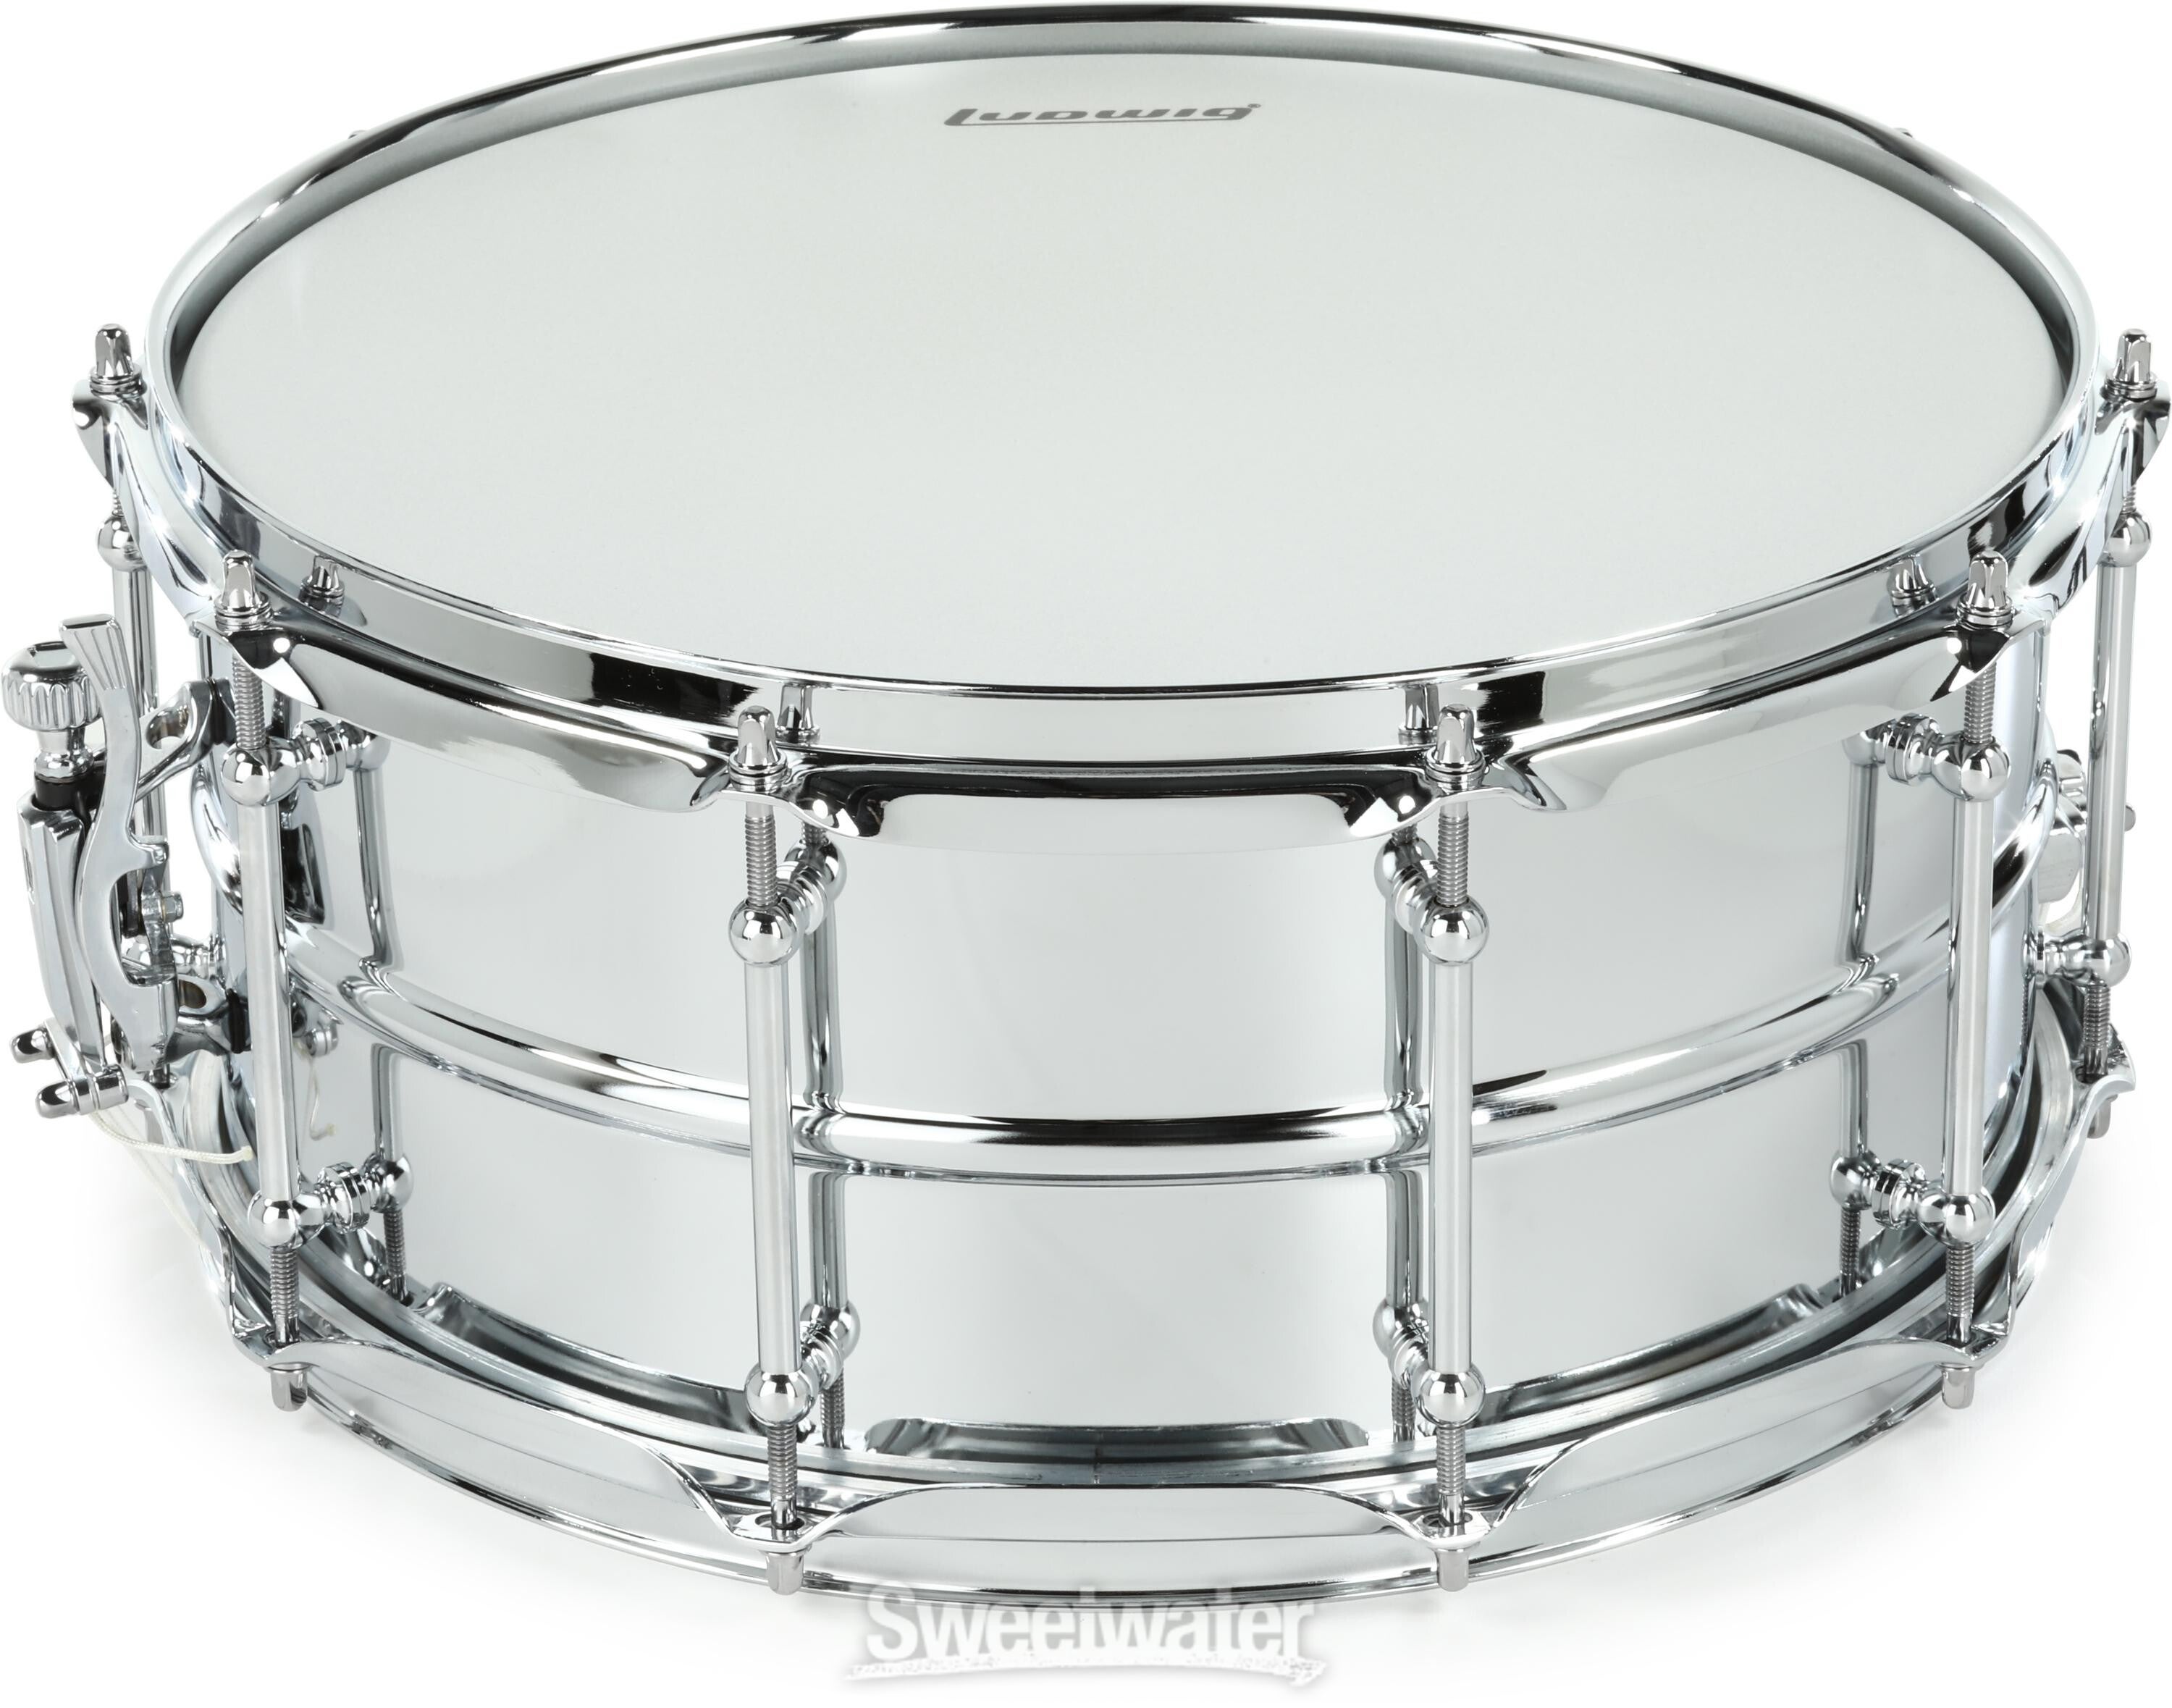 Ludwig Supralite Snare Drum - 6.5 x 14-inch - Polished